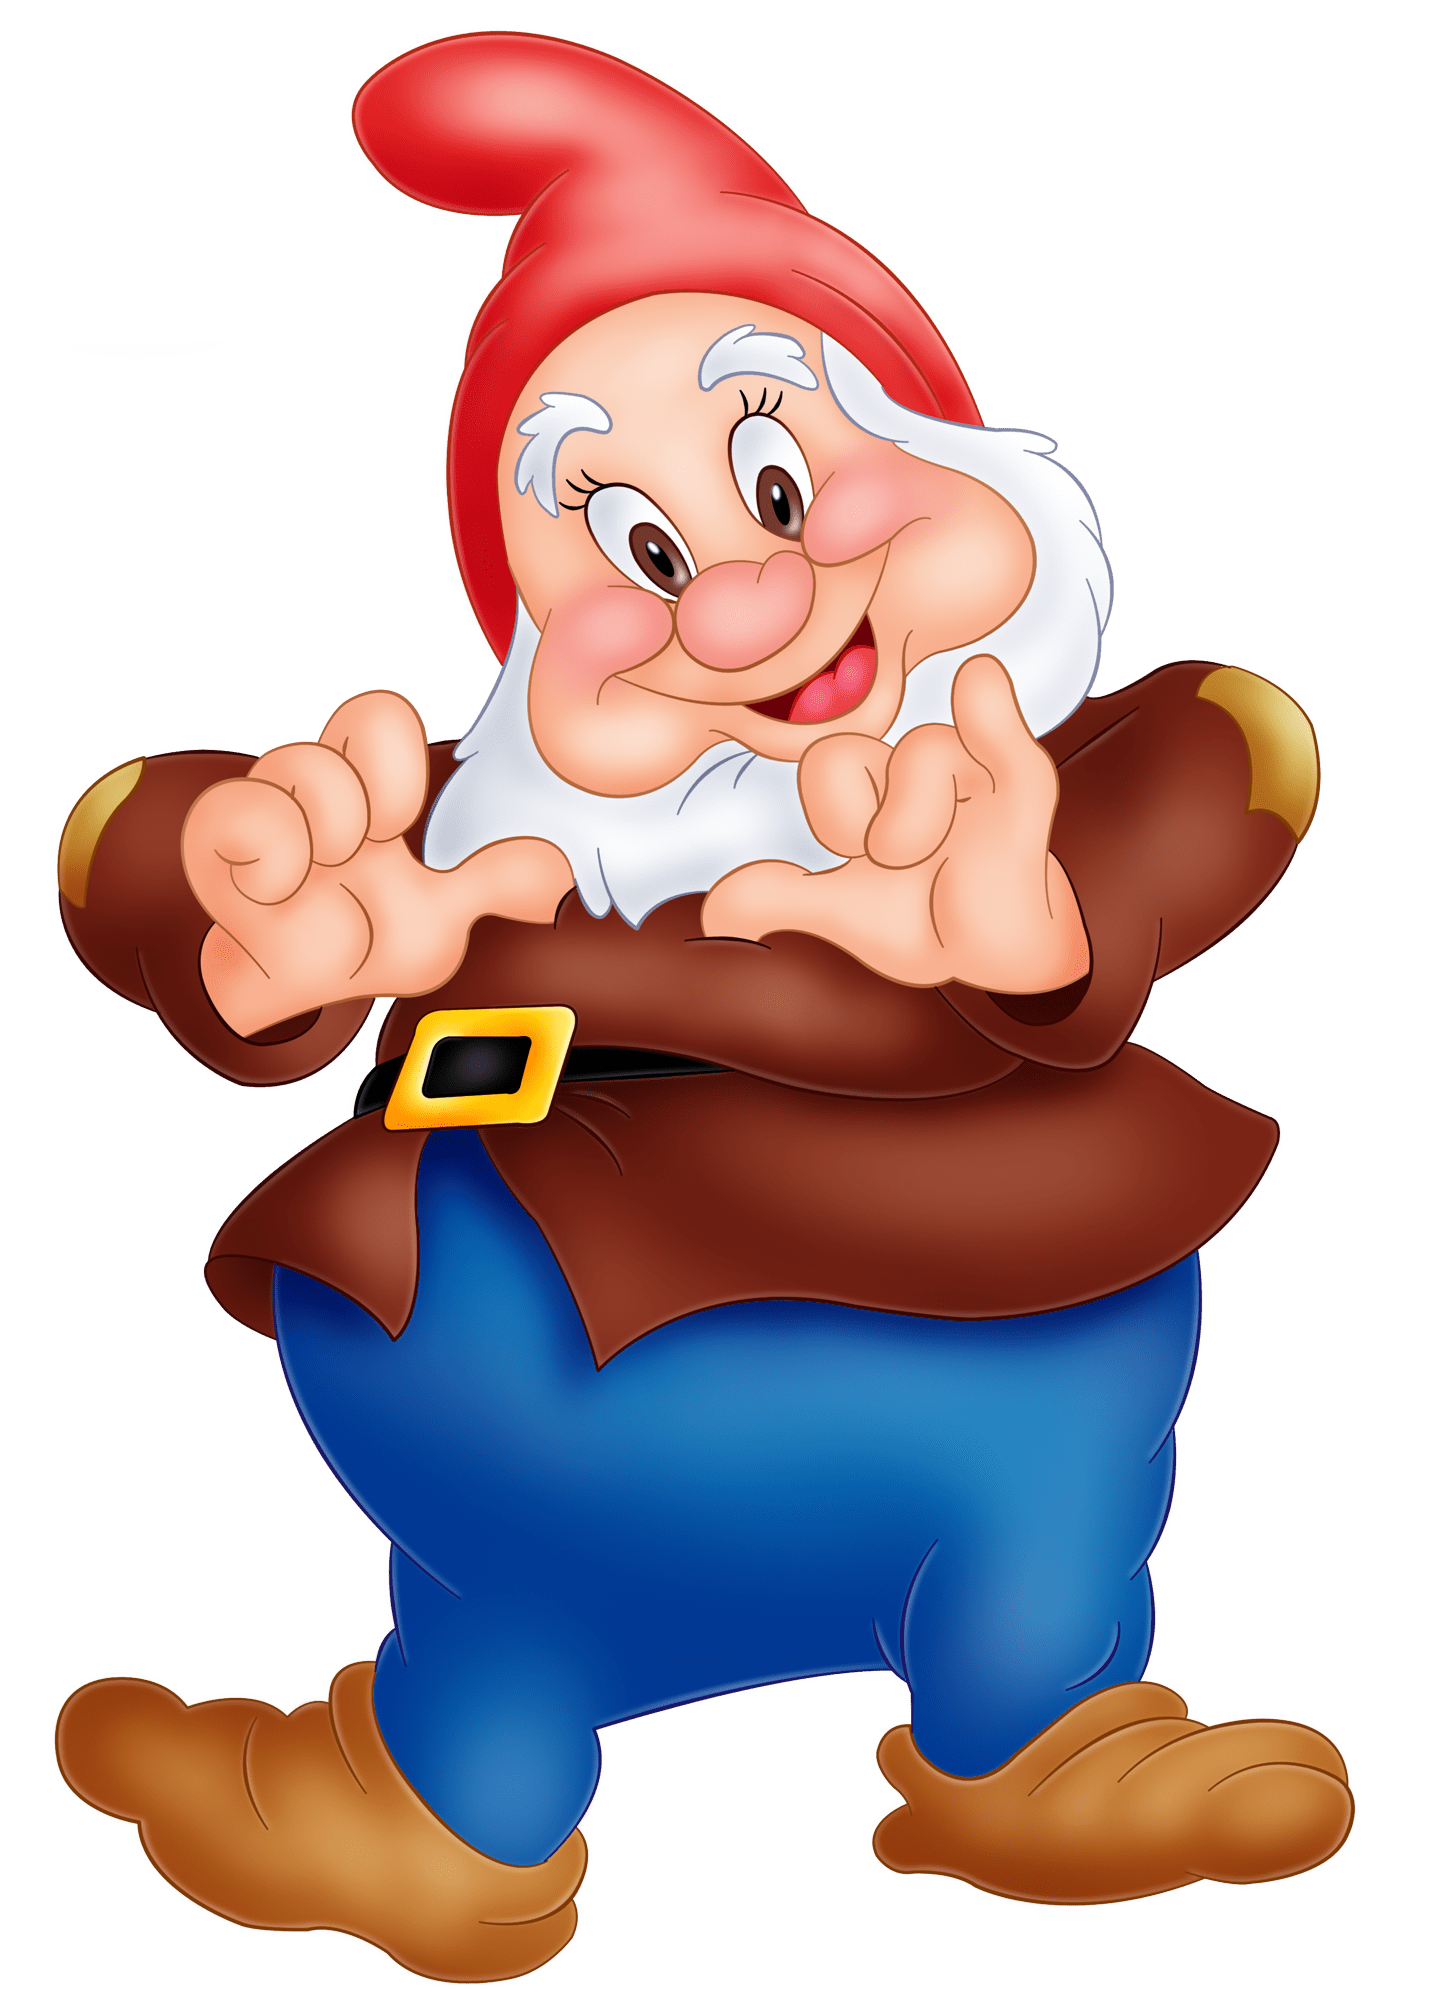 Snow White PNG HD Images - Snow White Png